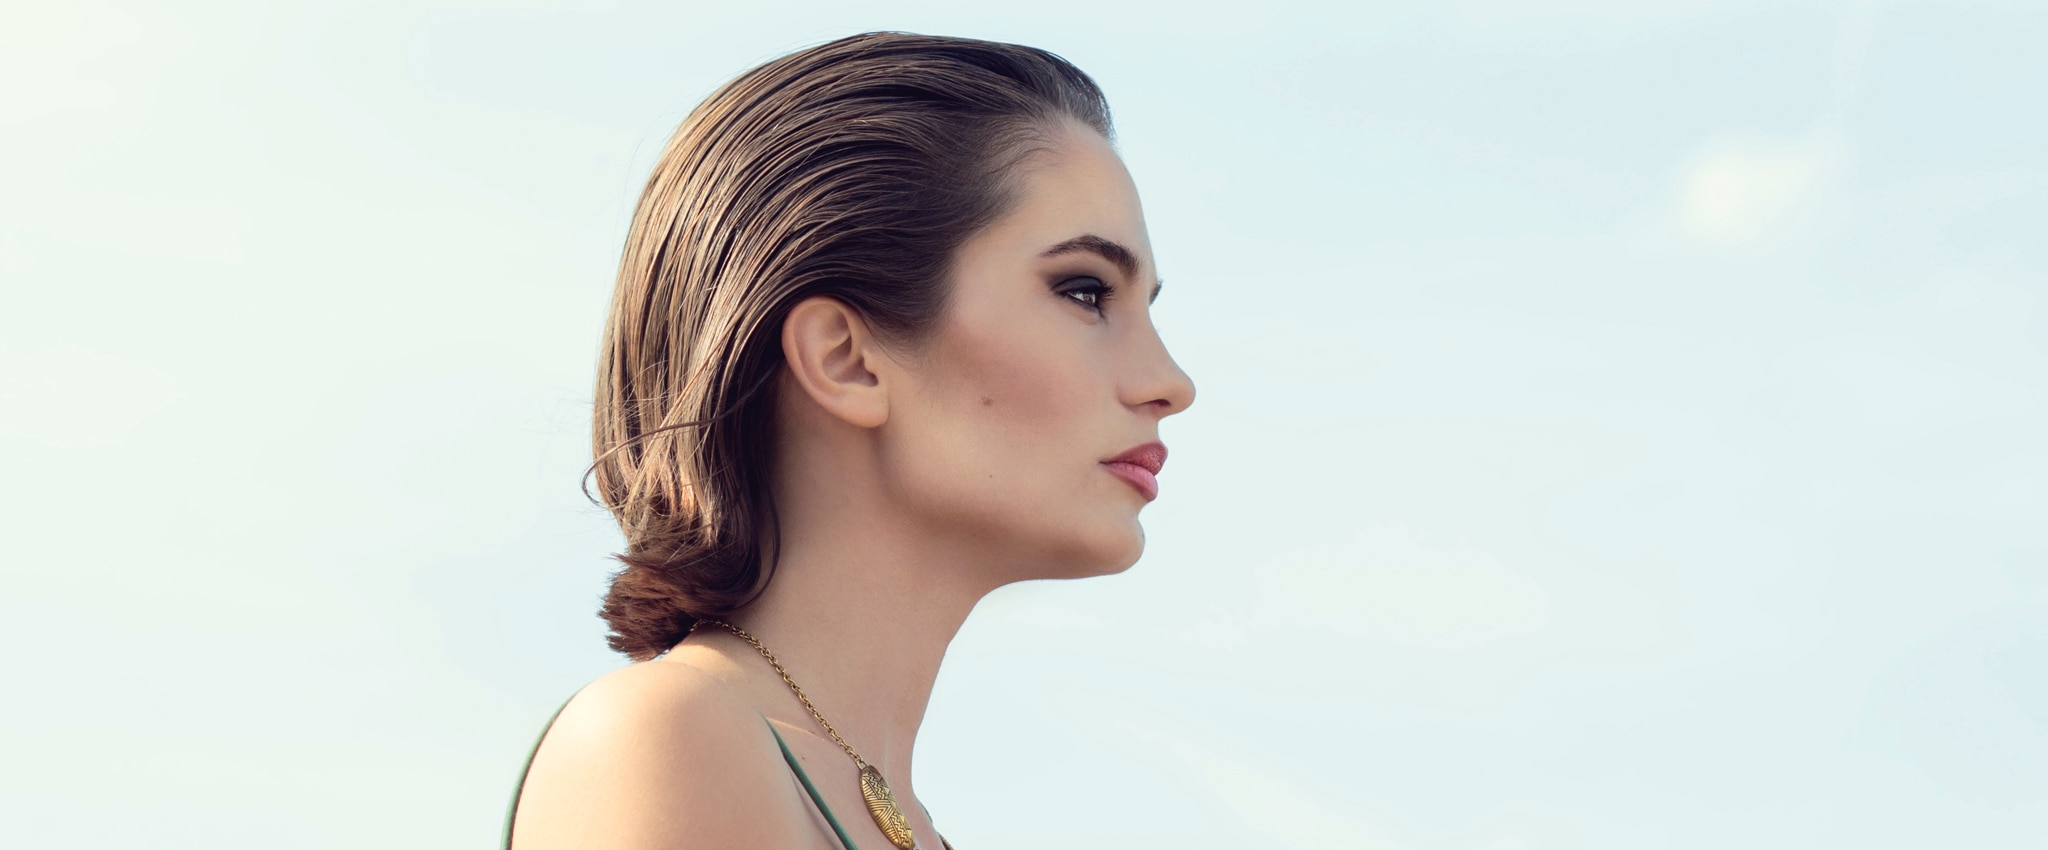 Woman with hair slicked back